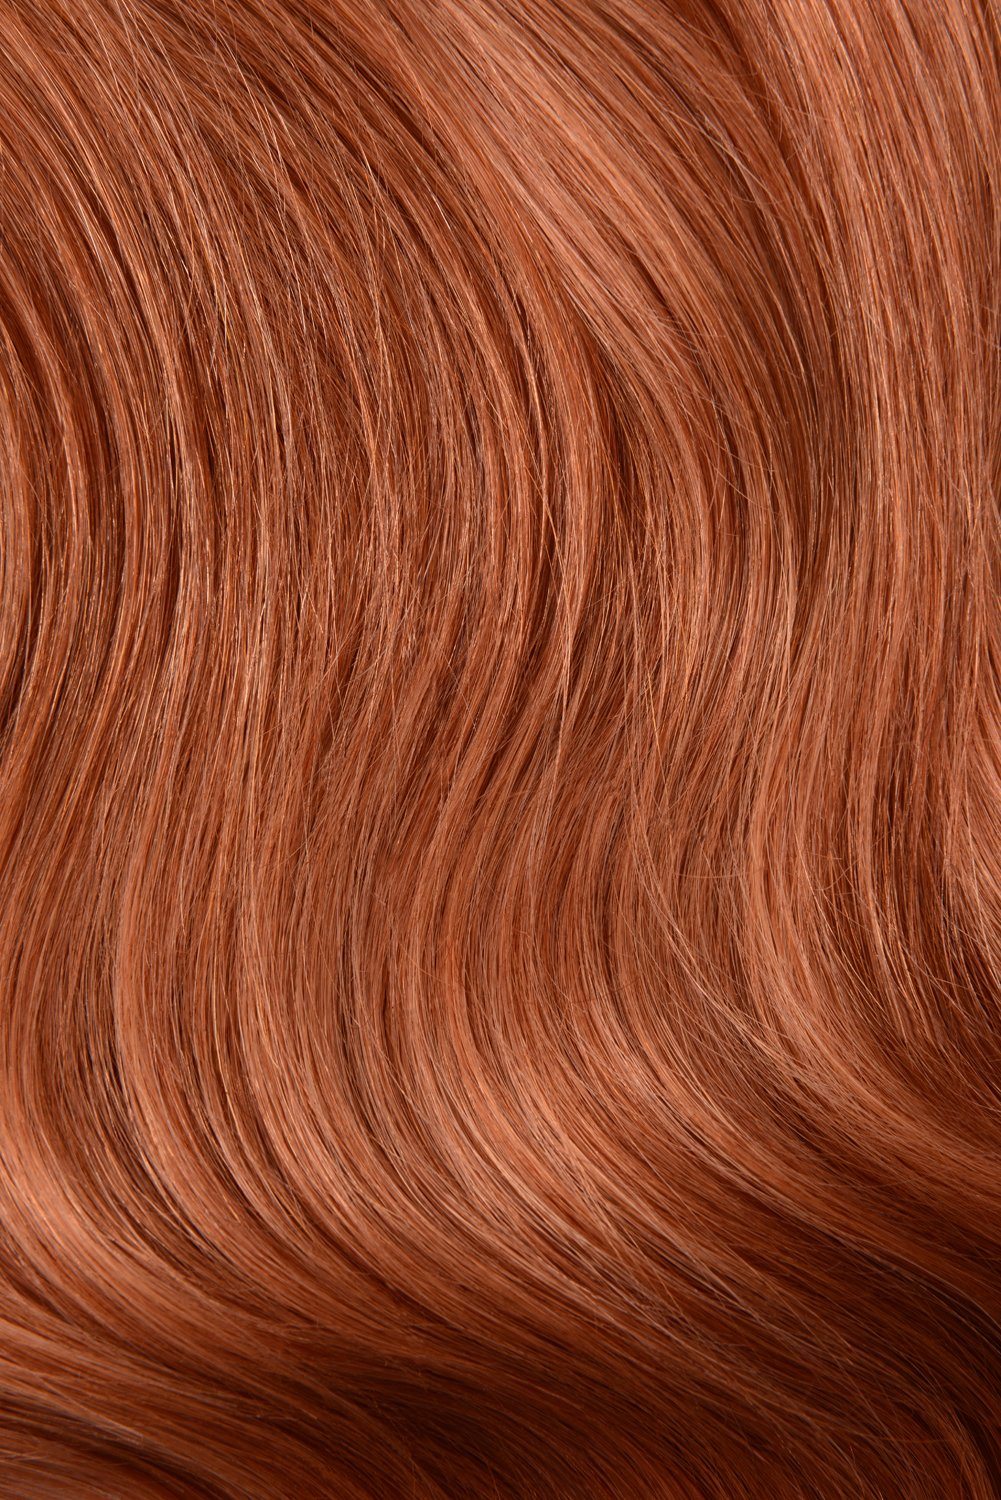 Double Wefted Full Head Remy Clip in Human Hair Extensions - Ginger Red/Natural Red (#350) Double wefted full head cliphair 